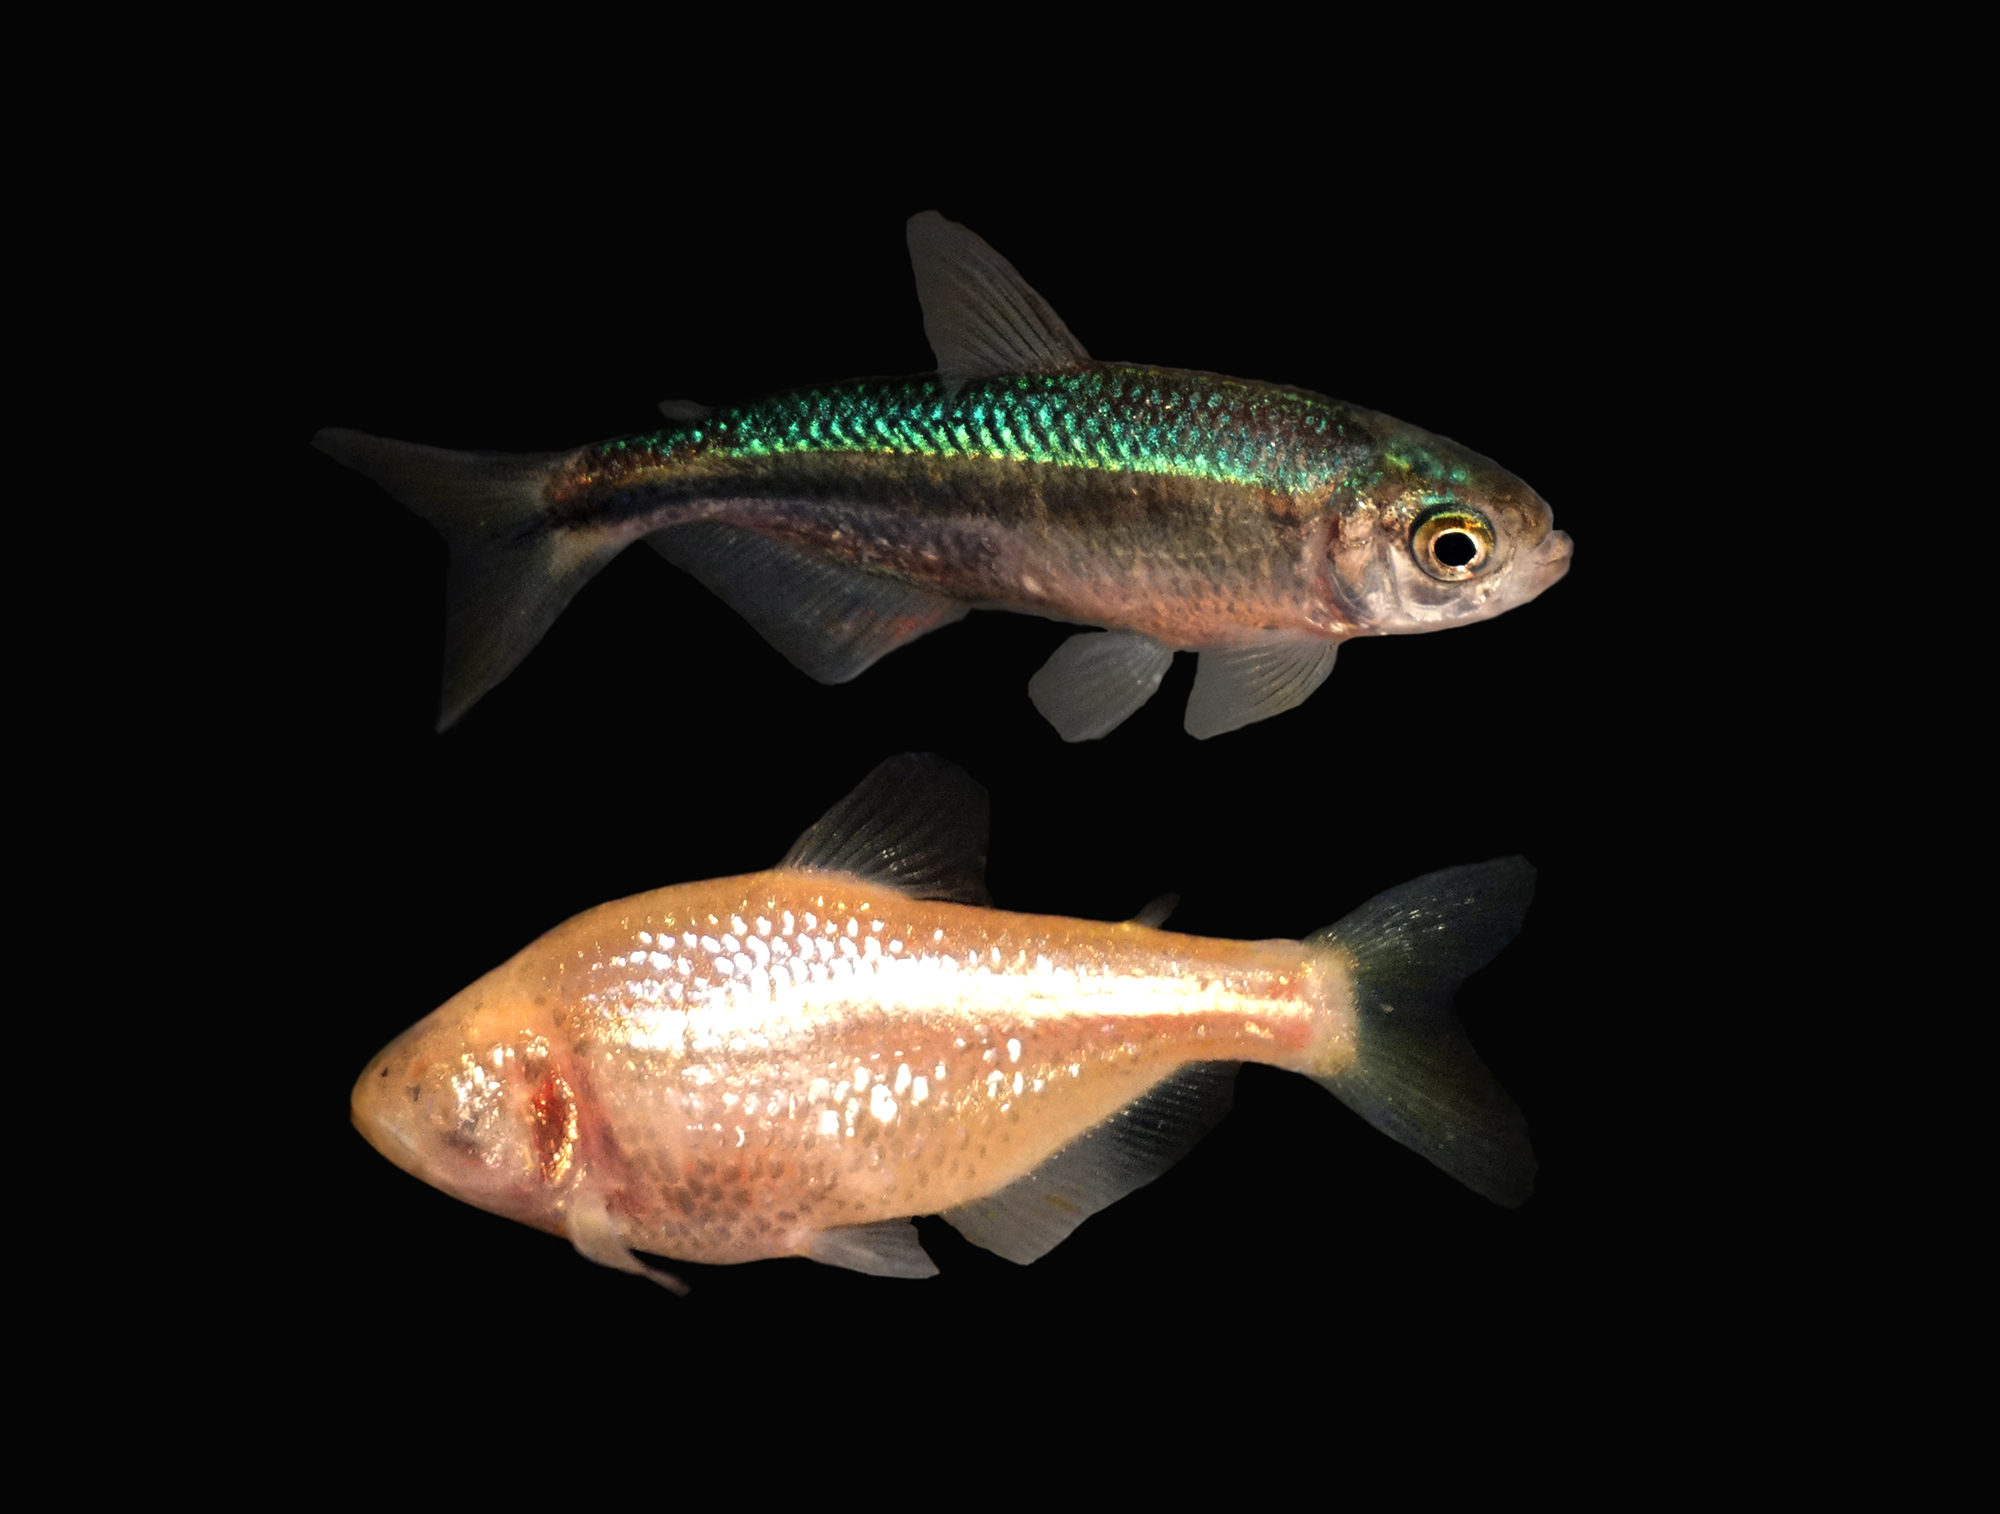 Image of cavefish with and without eyes